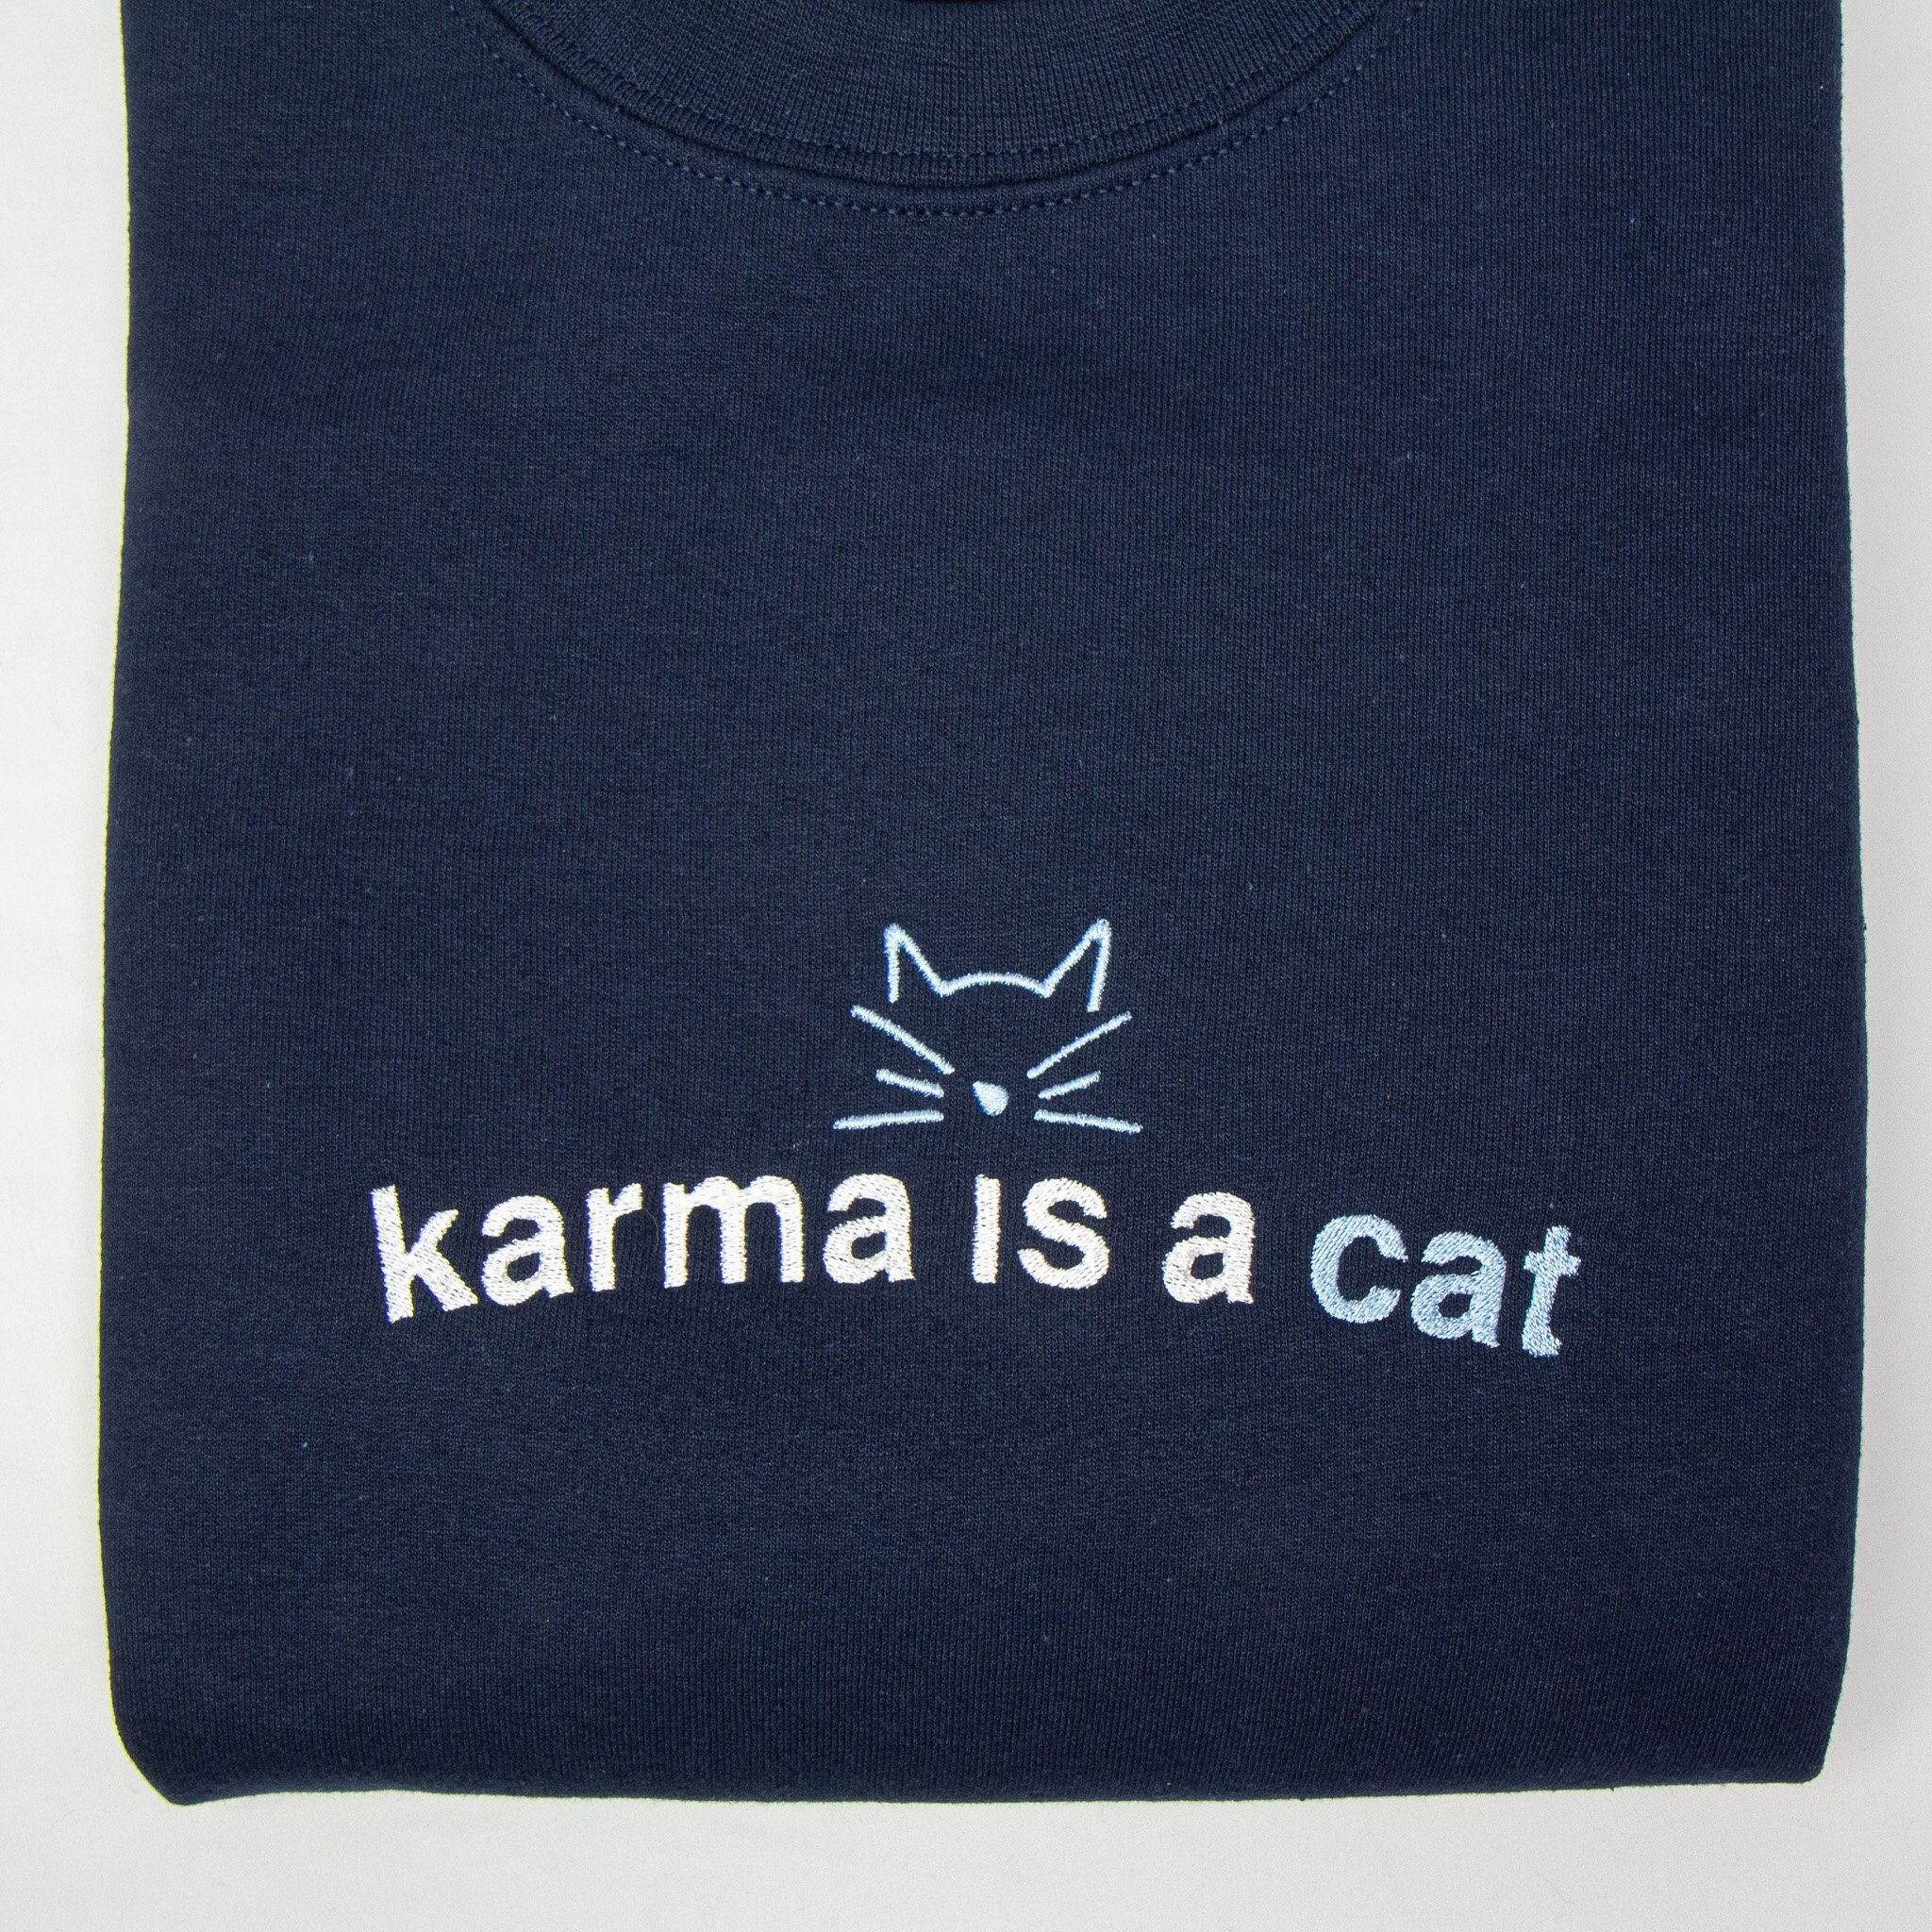 taylor-karma-is-a-cat-embroidered-crewneck_1667842757.jpg